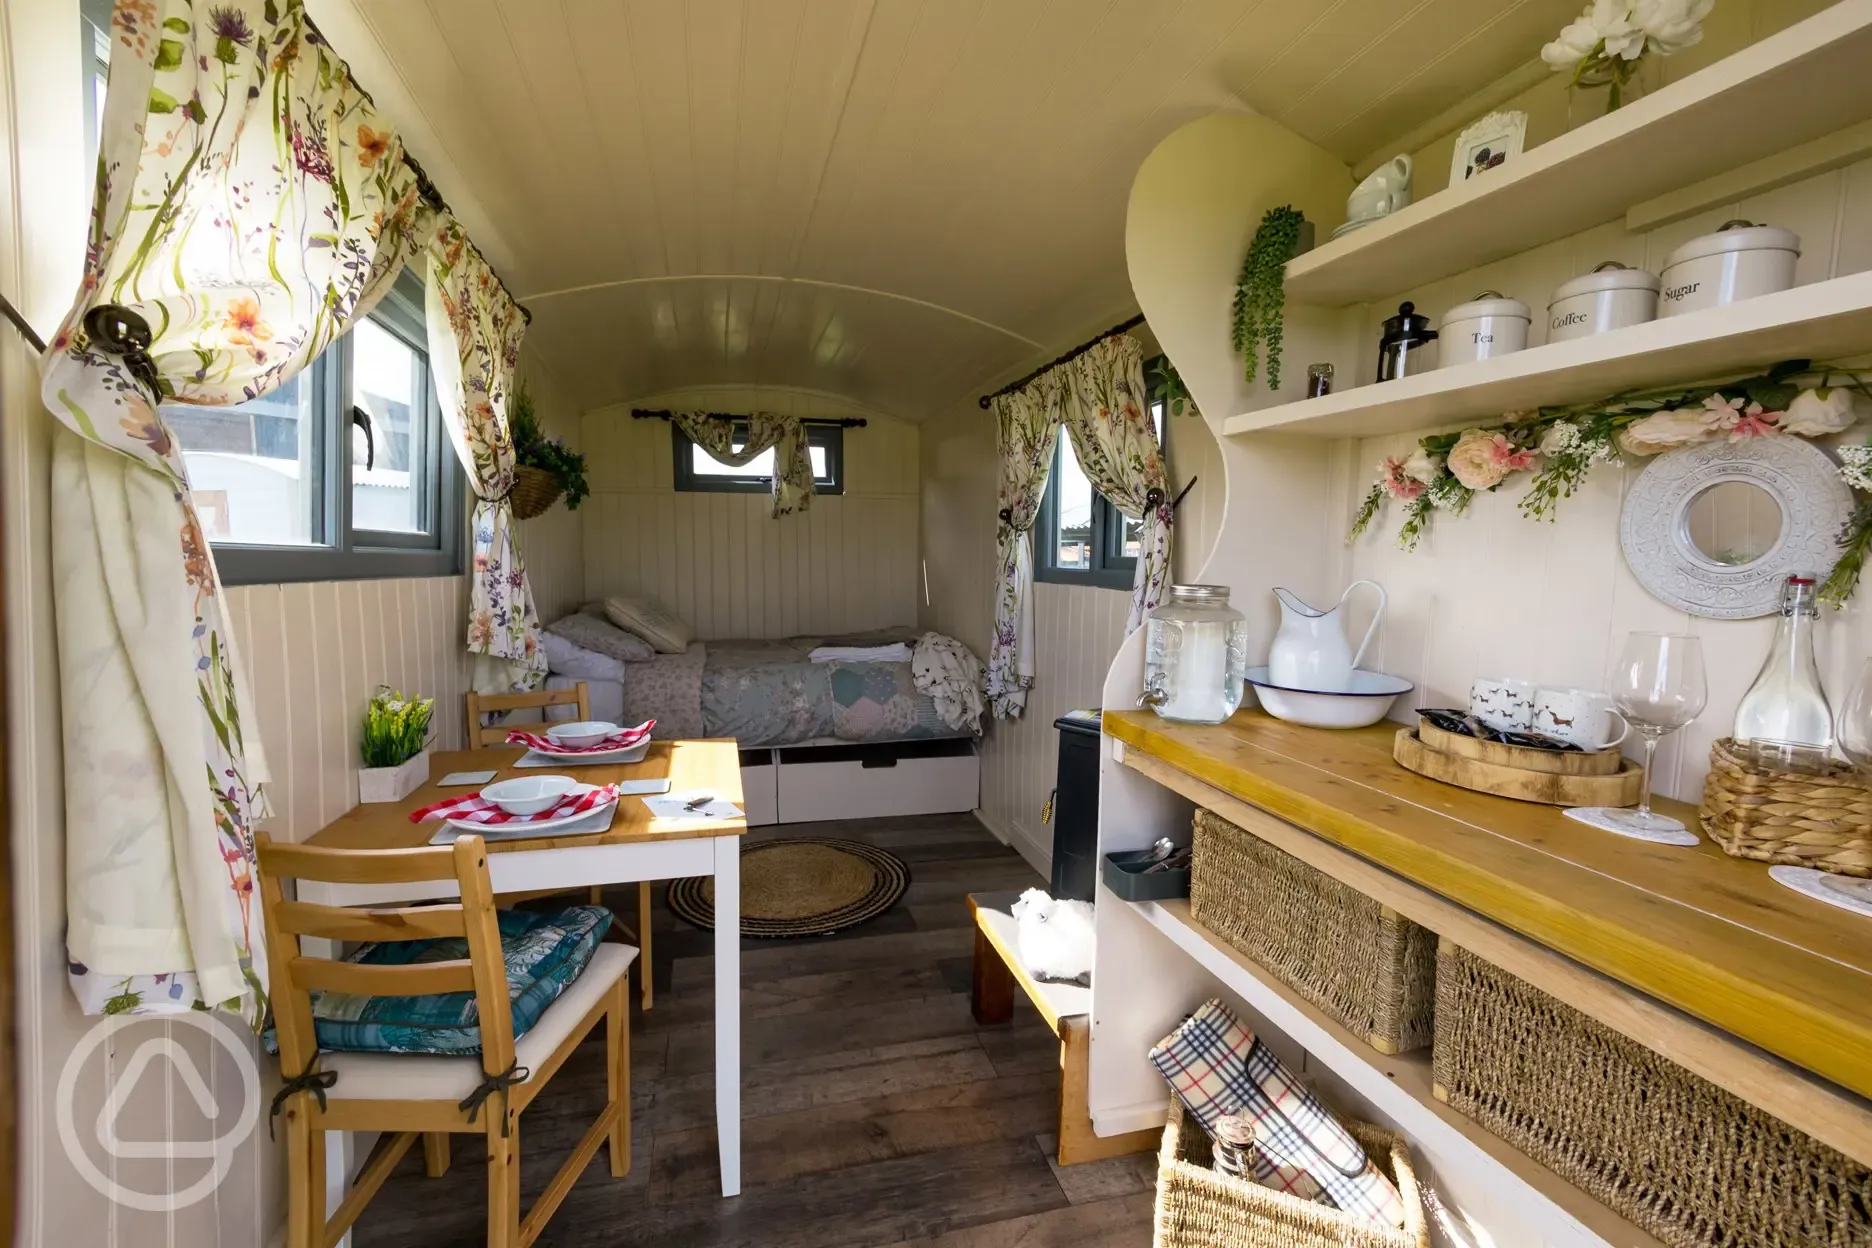 Shepherd hut with peaceful countryside comfort style